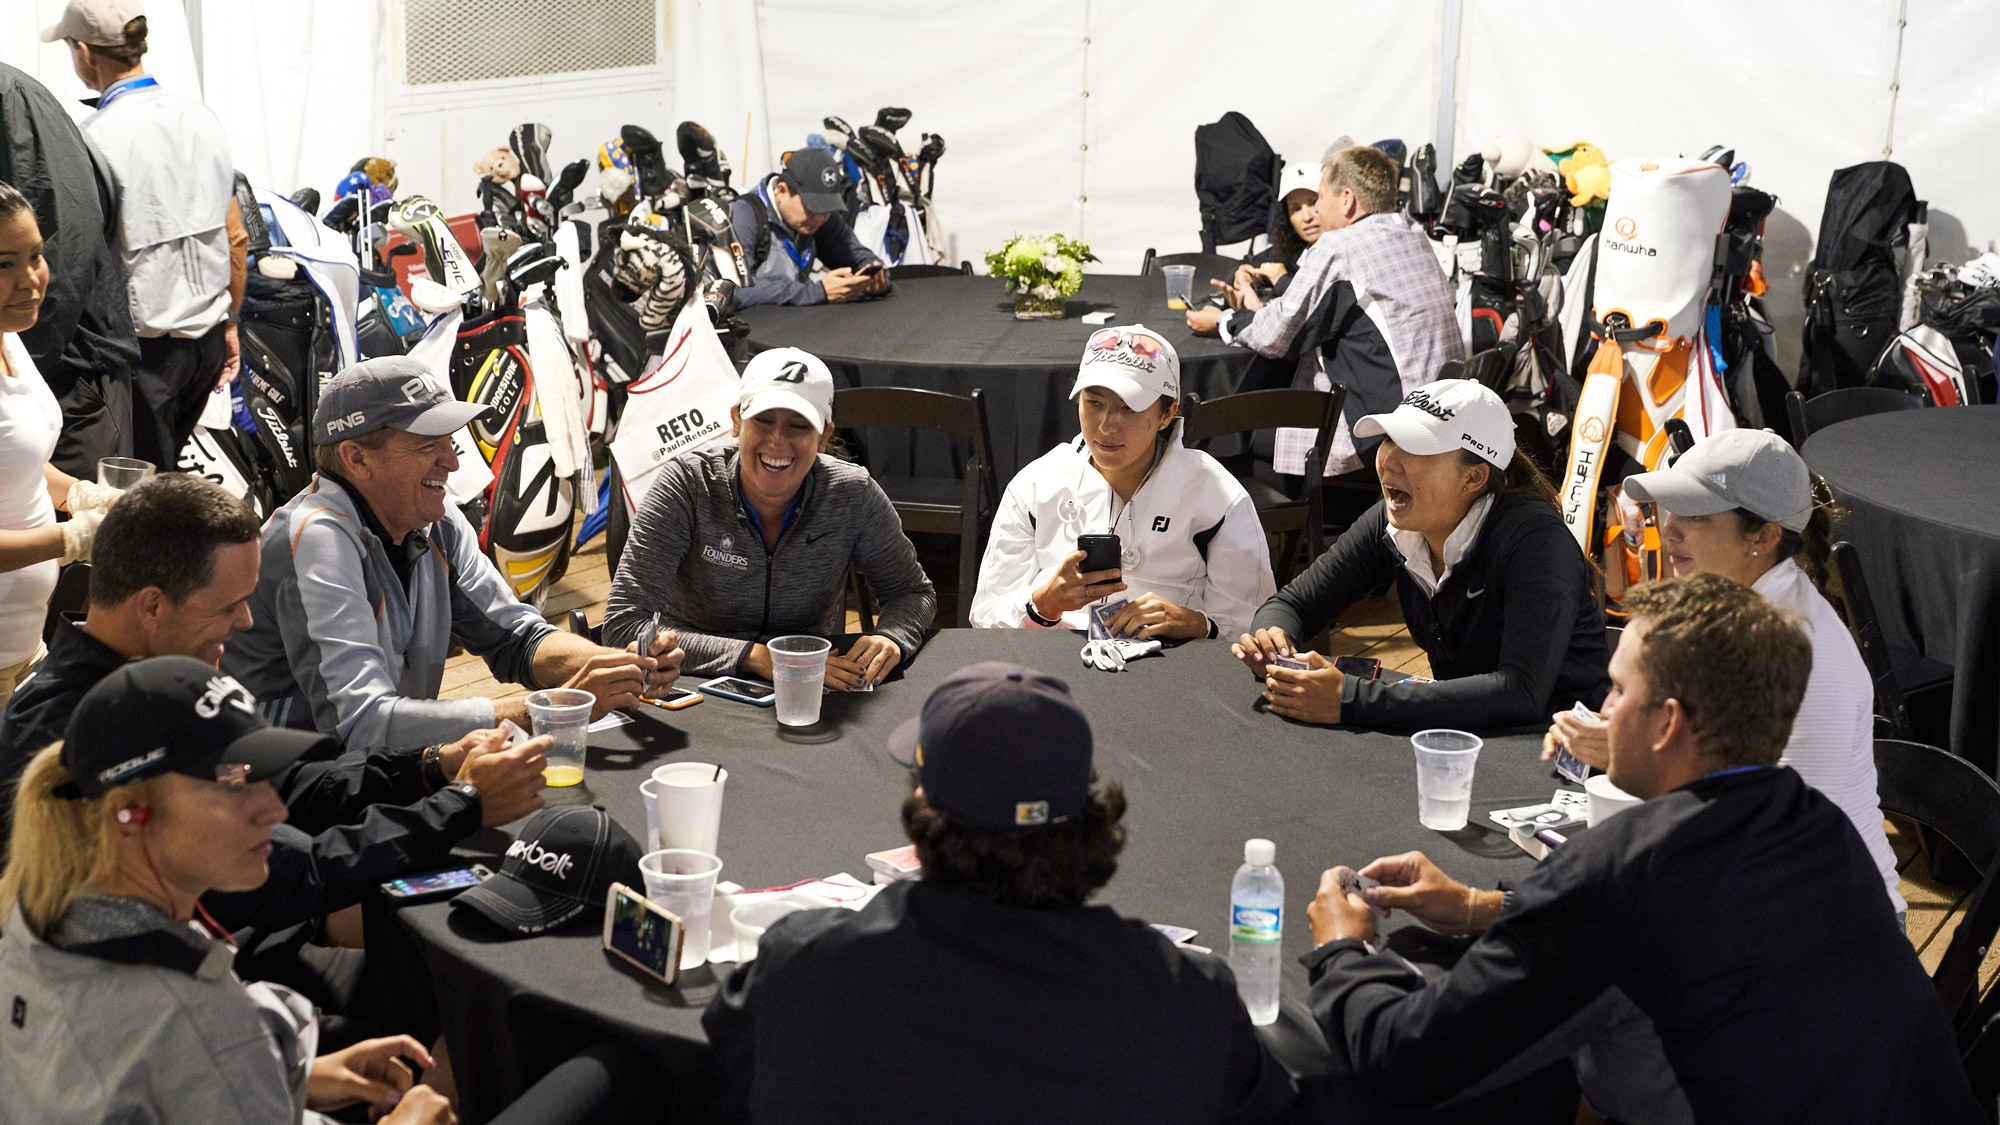 Players Hang Out During Thursday's Delay at the VOA LPGA Texas Classic 